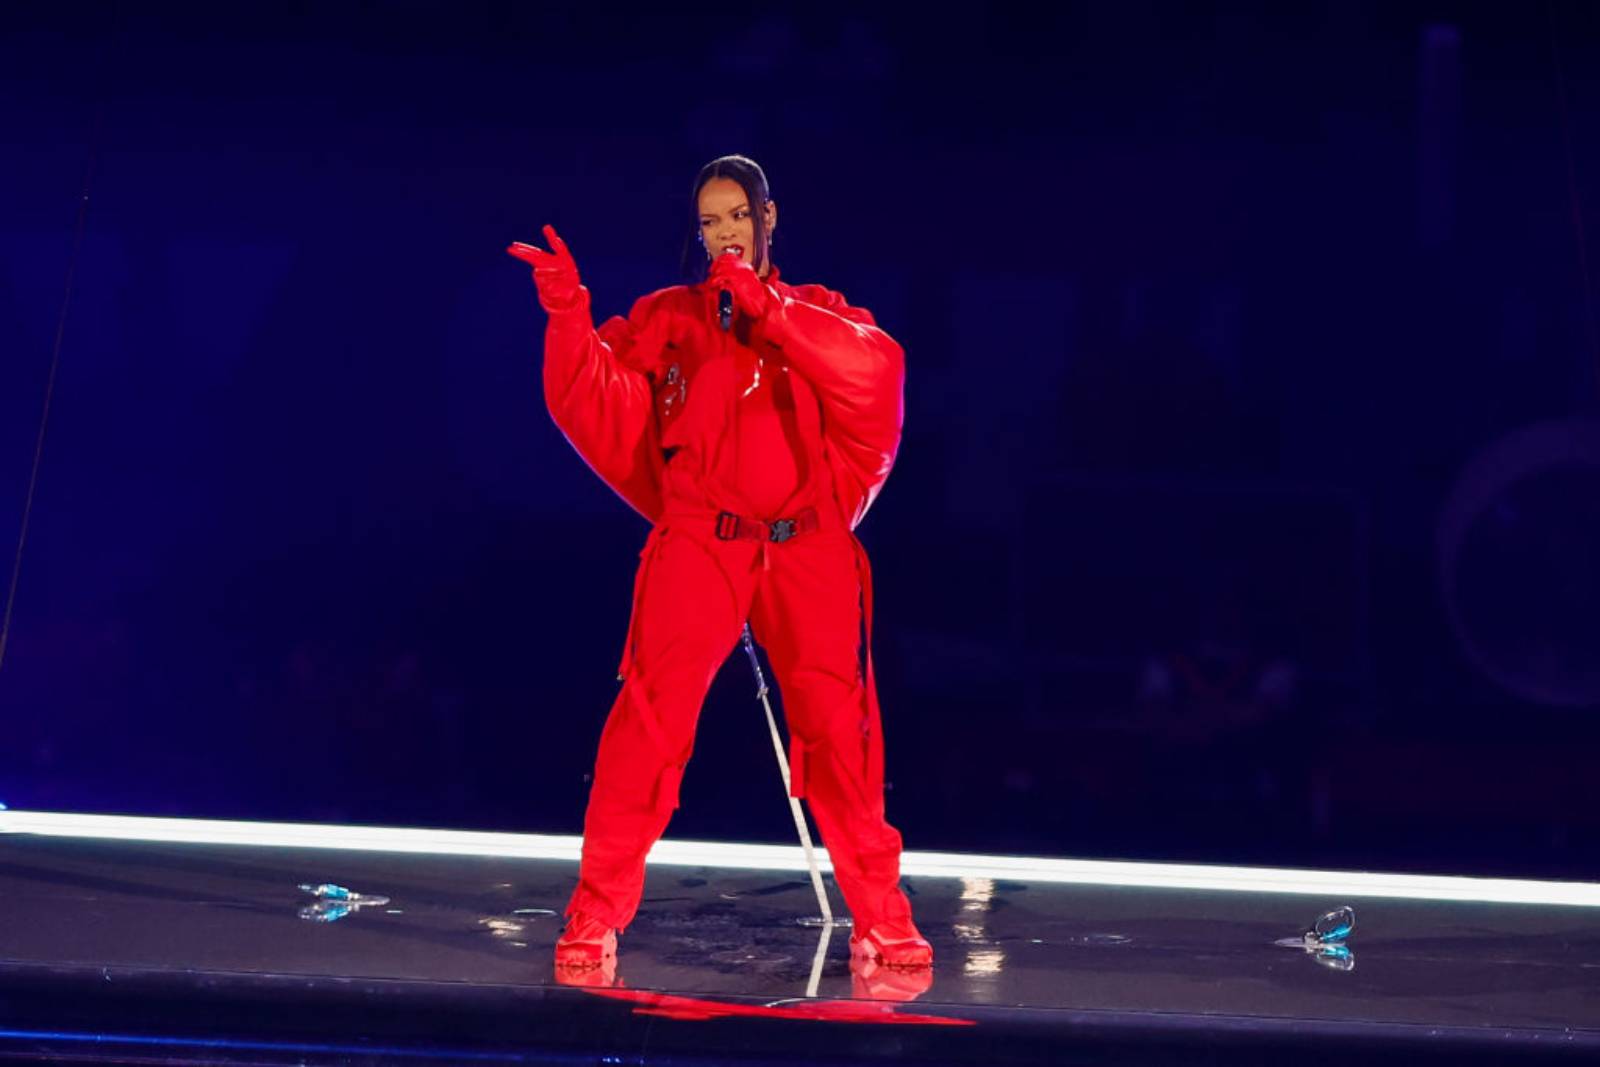 Rihanna performs during the Apple Music Super Bowl LVII Halftime Show at State Farm Stadium on February 12, 2023 in Glendale, Arizona. (Photo by Kevin Sabitus/Getty Images)